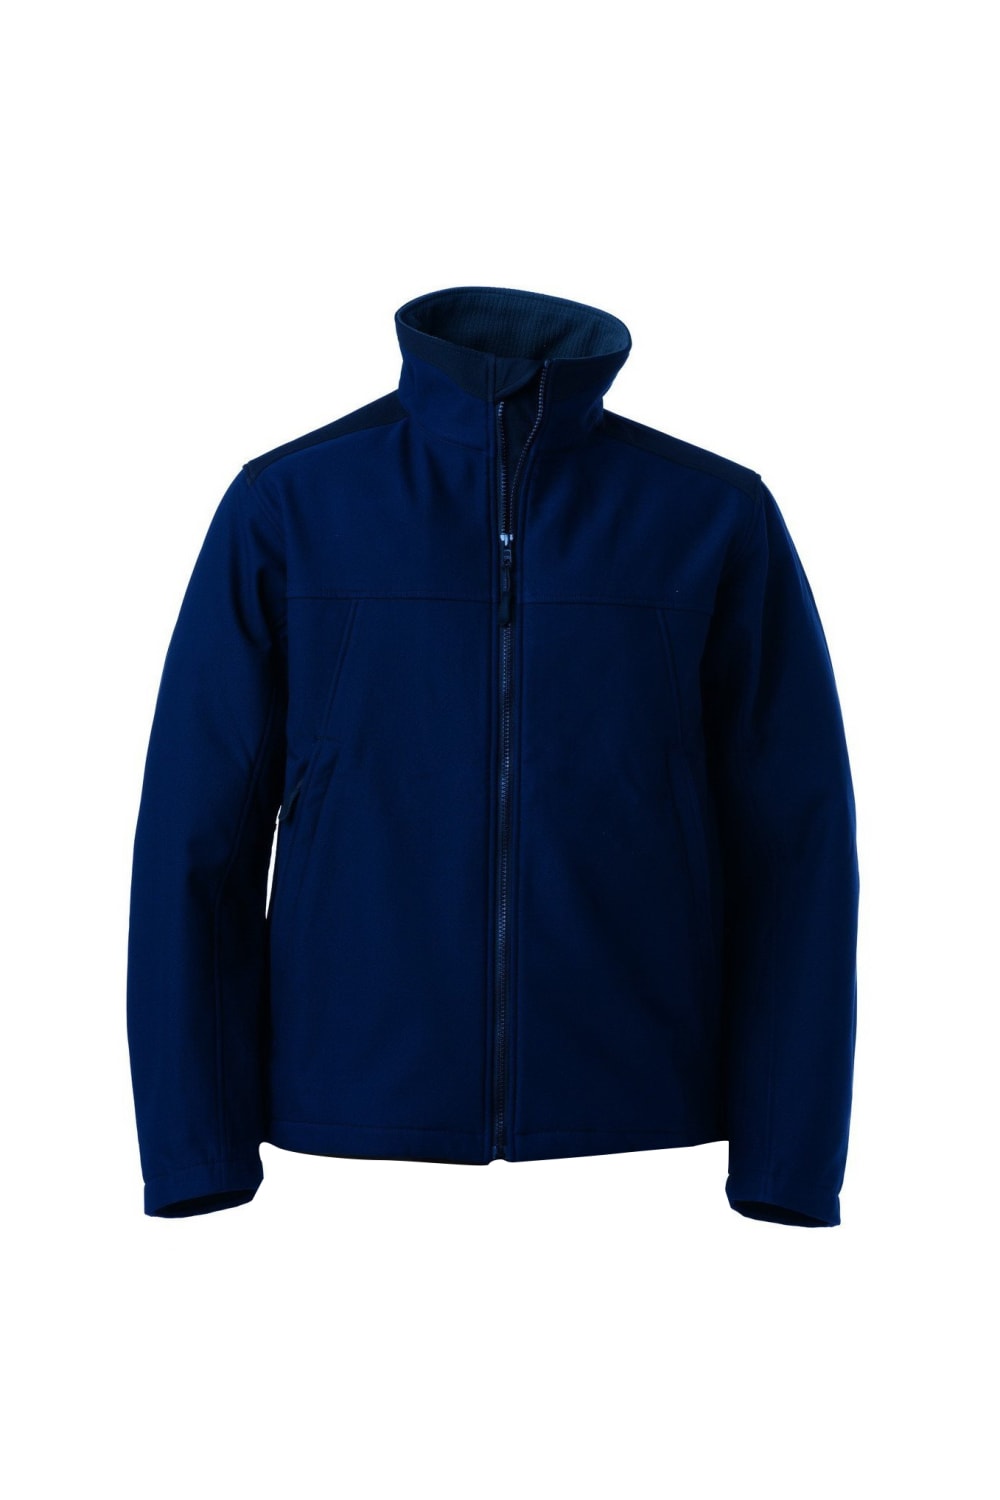 Russell Workwear Mens Softshell Breathable  Waterproof Membrane Jacket (French Navy)